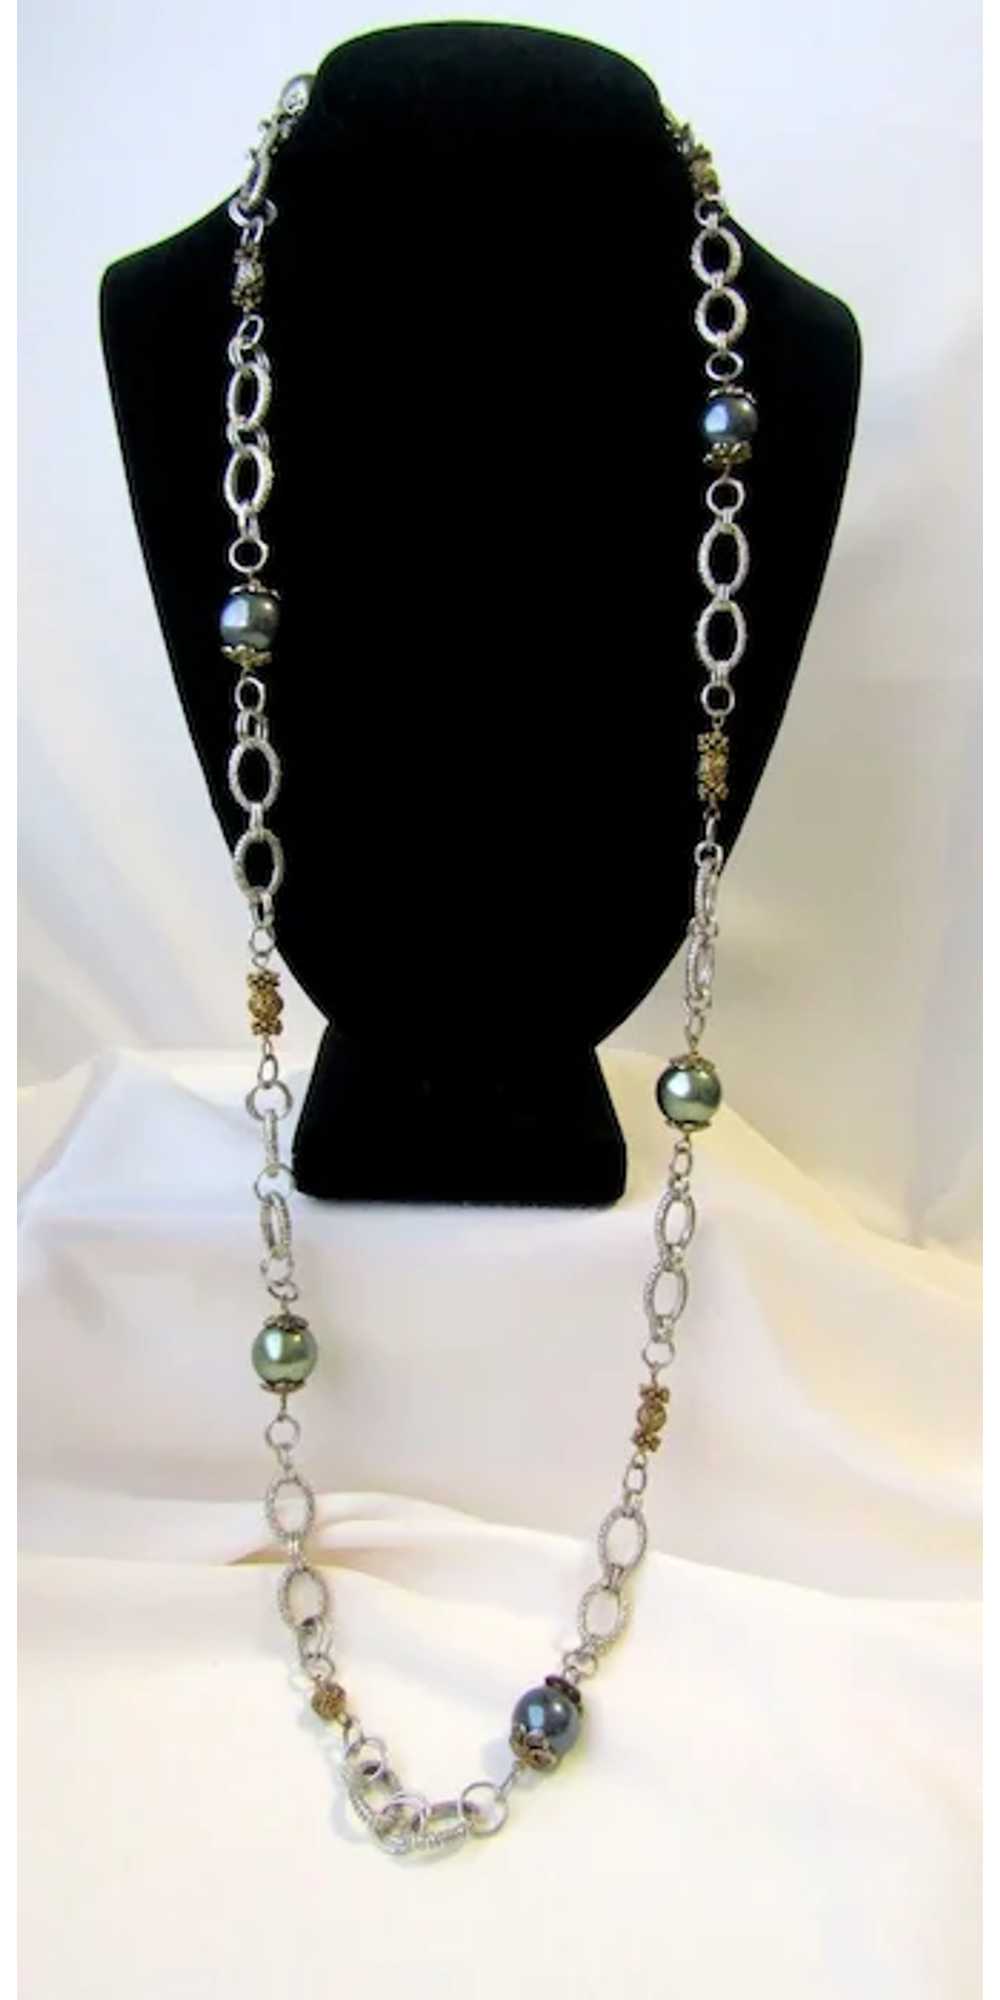 Vintage Faux Gray Pearls Chain Necklace - image 2